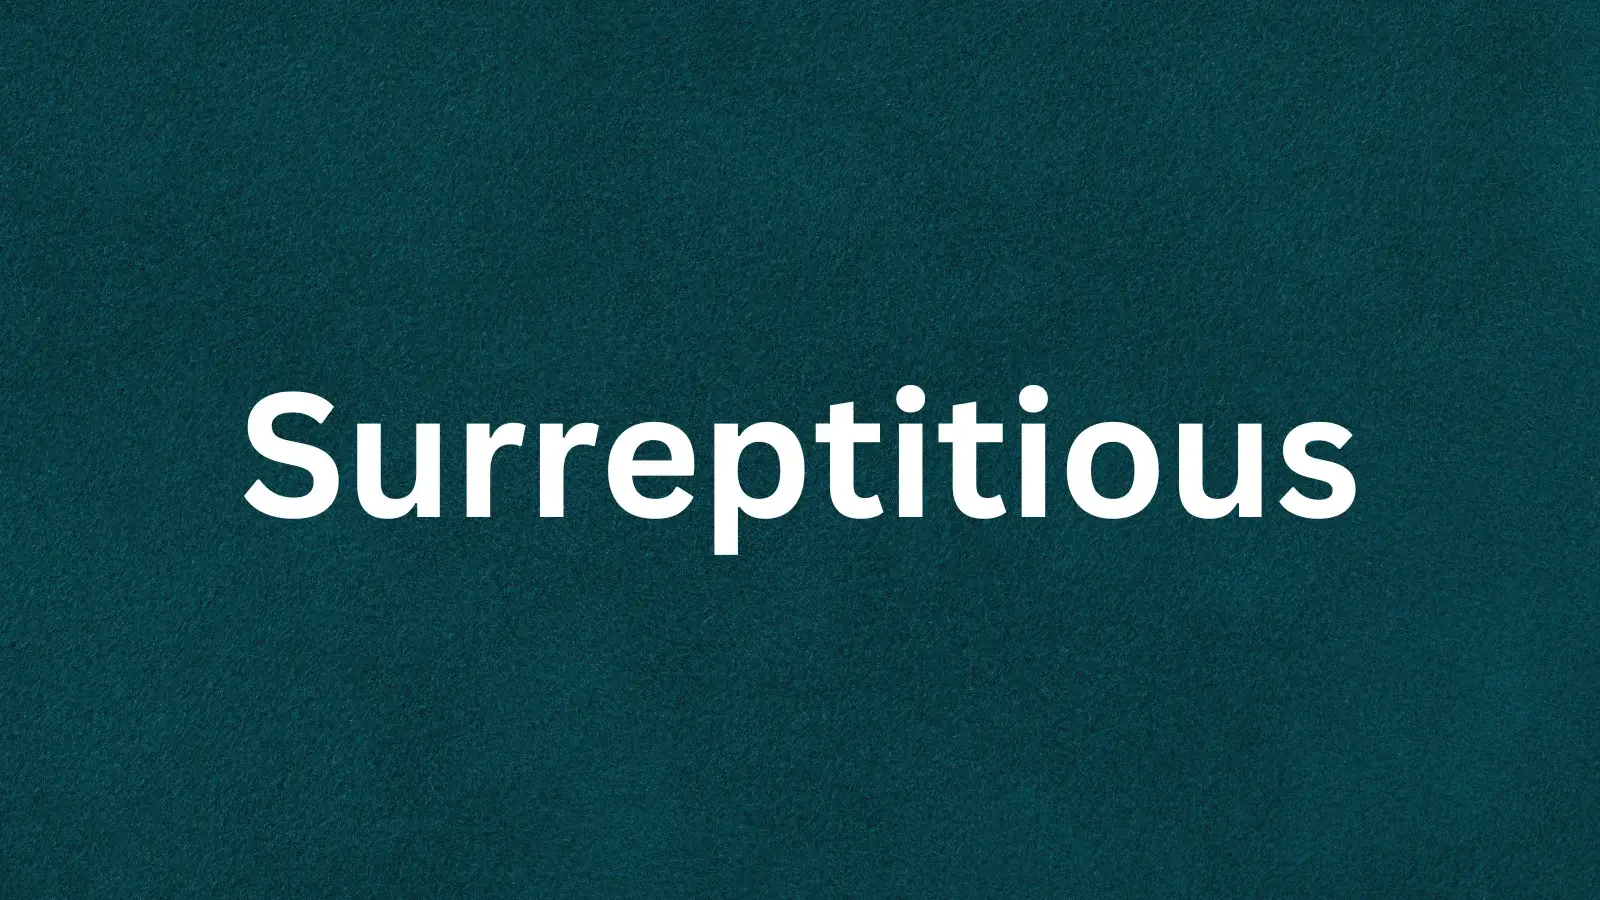 The word surreptitious and its meaning